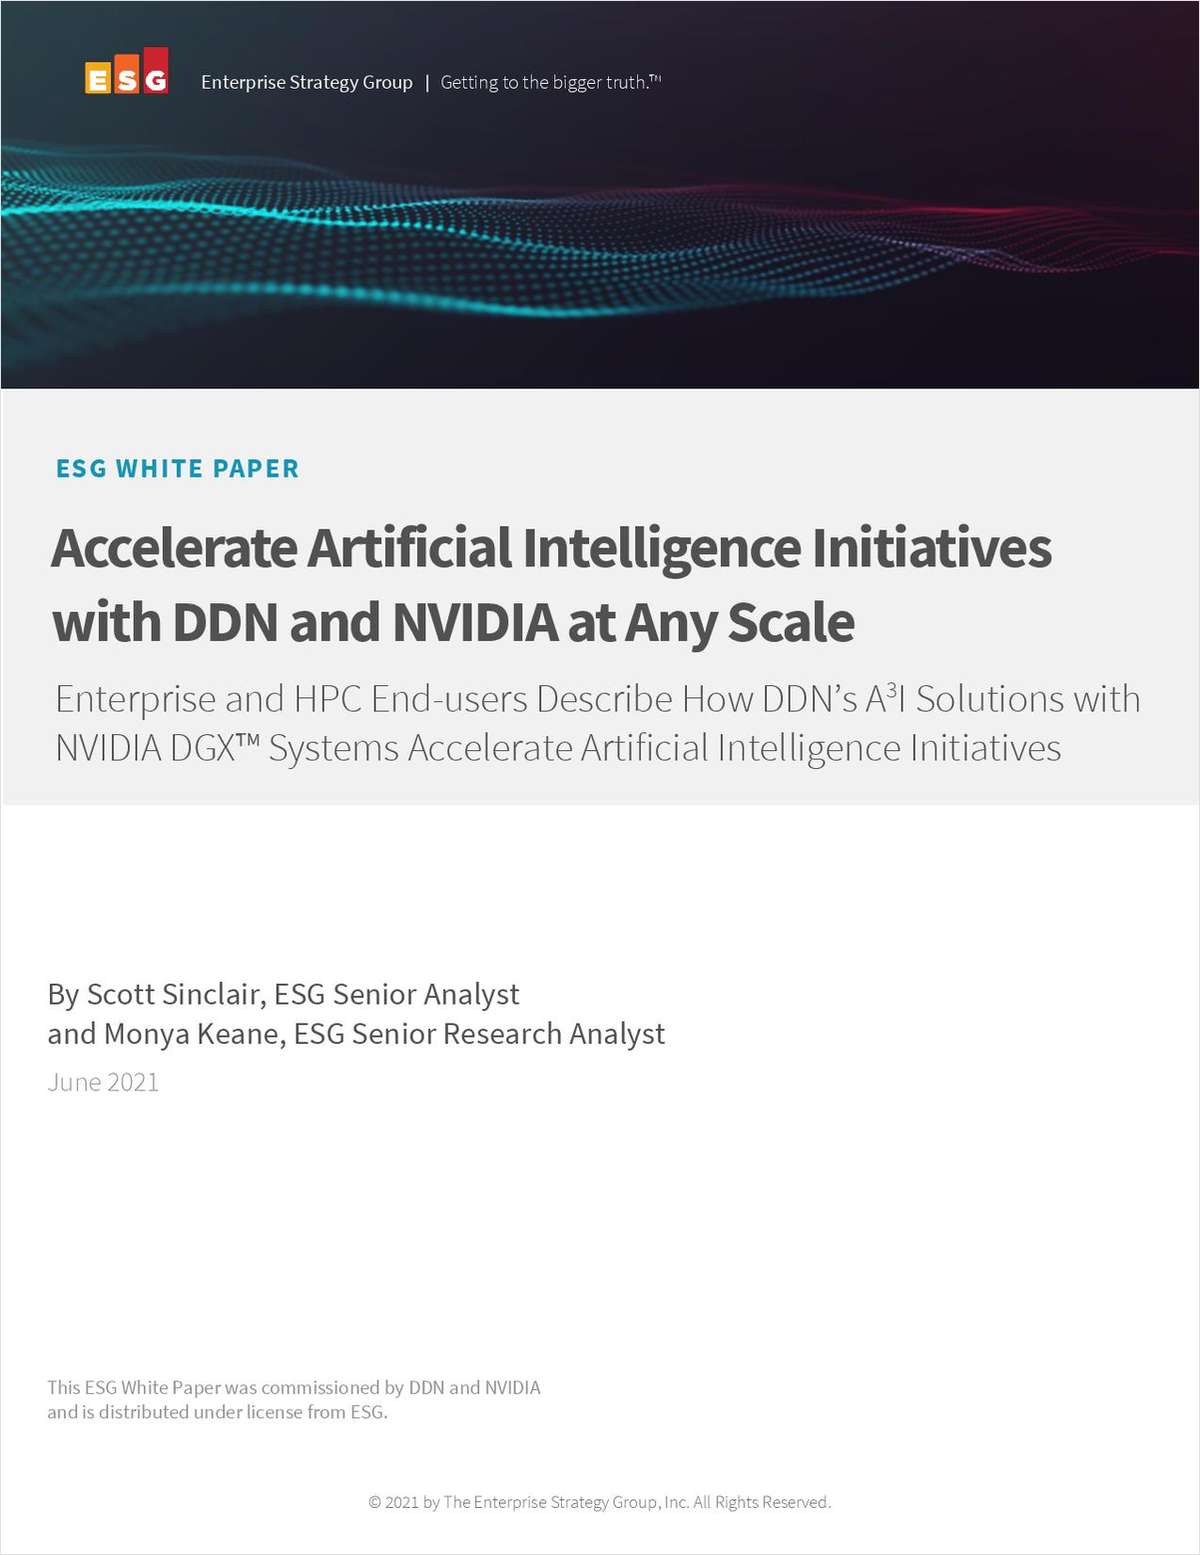 Accelerate Artificial Intelligence Initiatives with DDN and NVIDIA at Any Scale